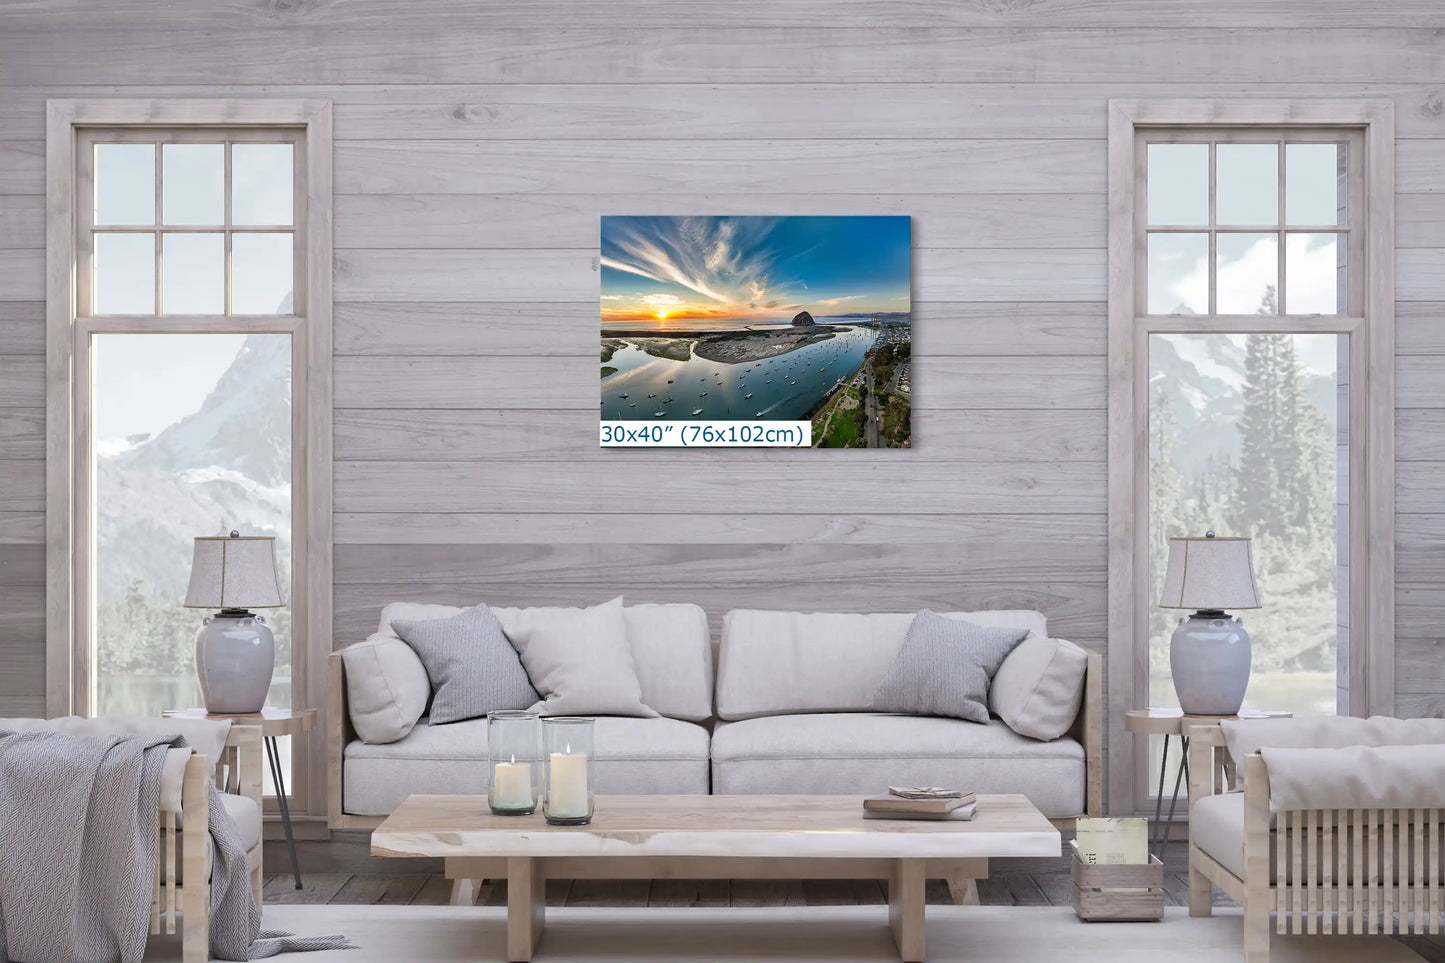 Large 30x40 canvas in a living space, showcasing Morro Bay's aerial view, a gift of decoration that celebrates the outdoors and coastal serenity.